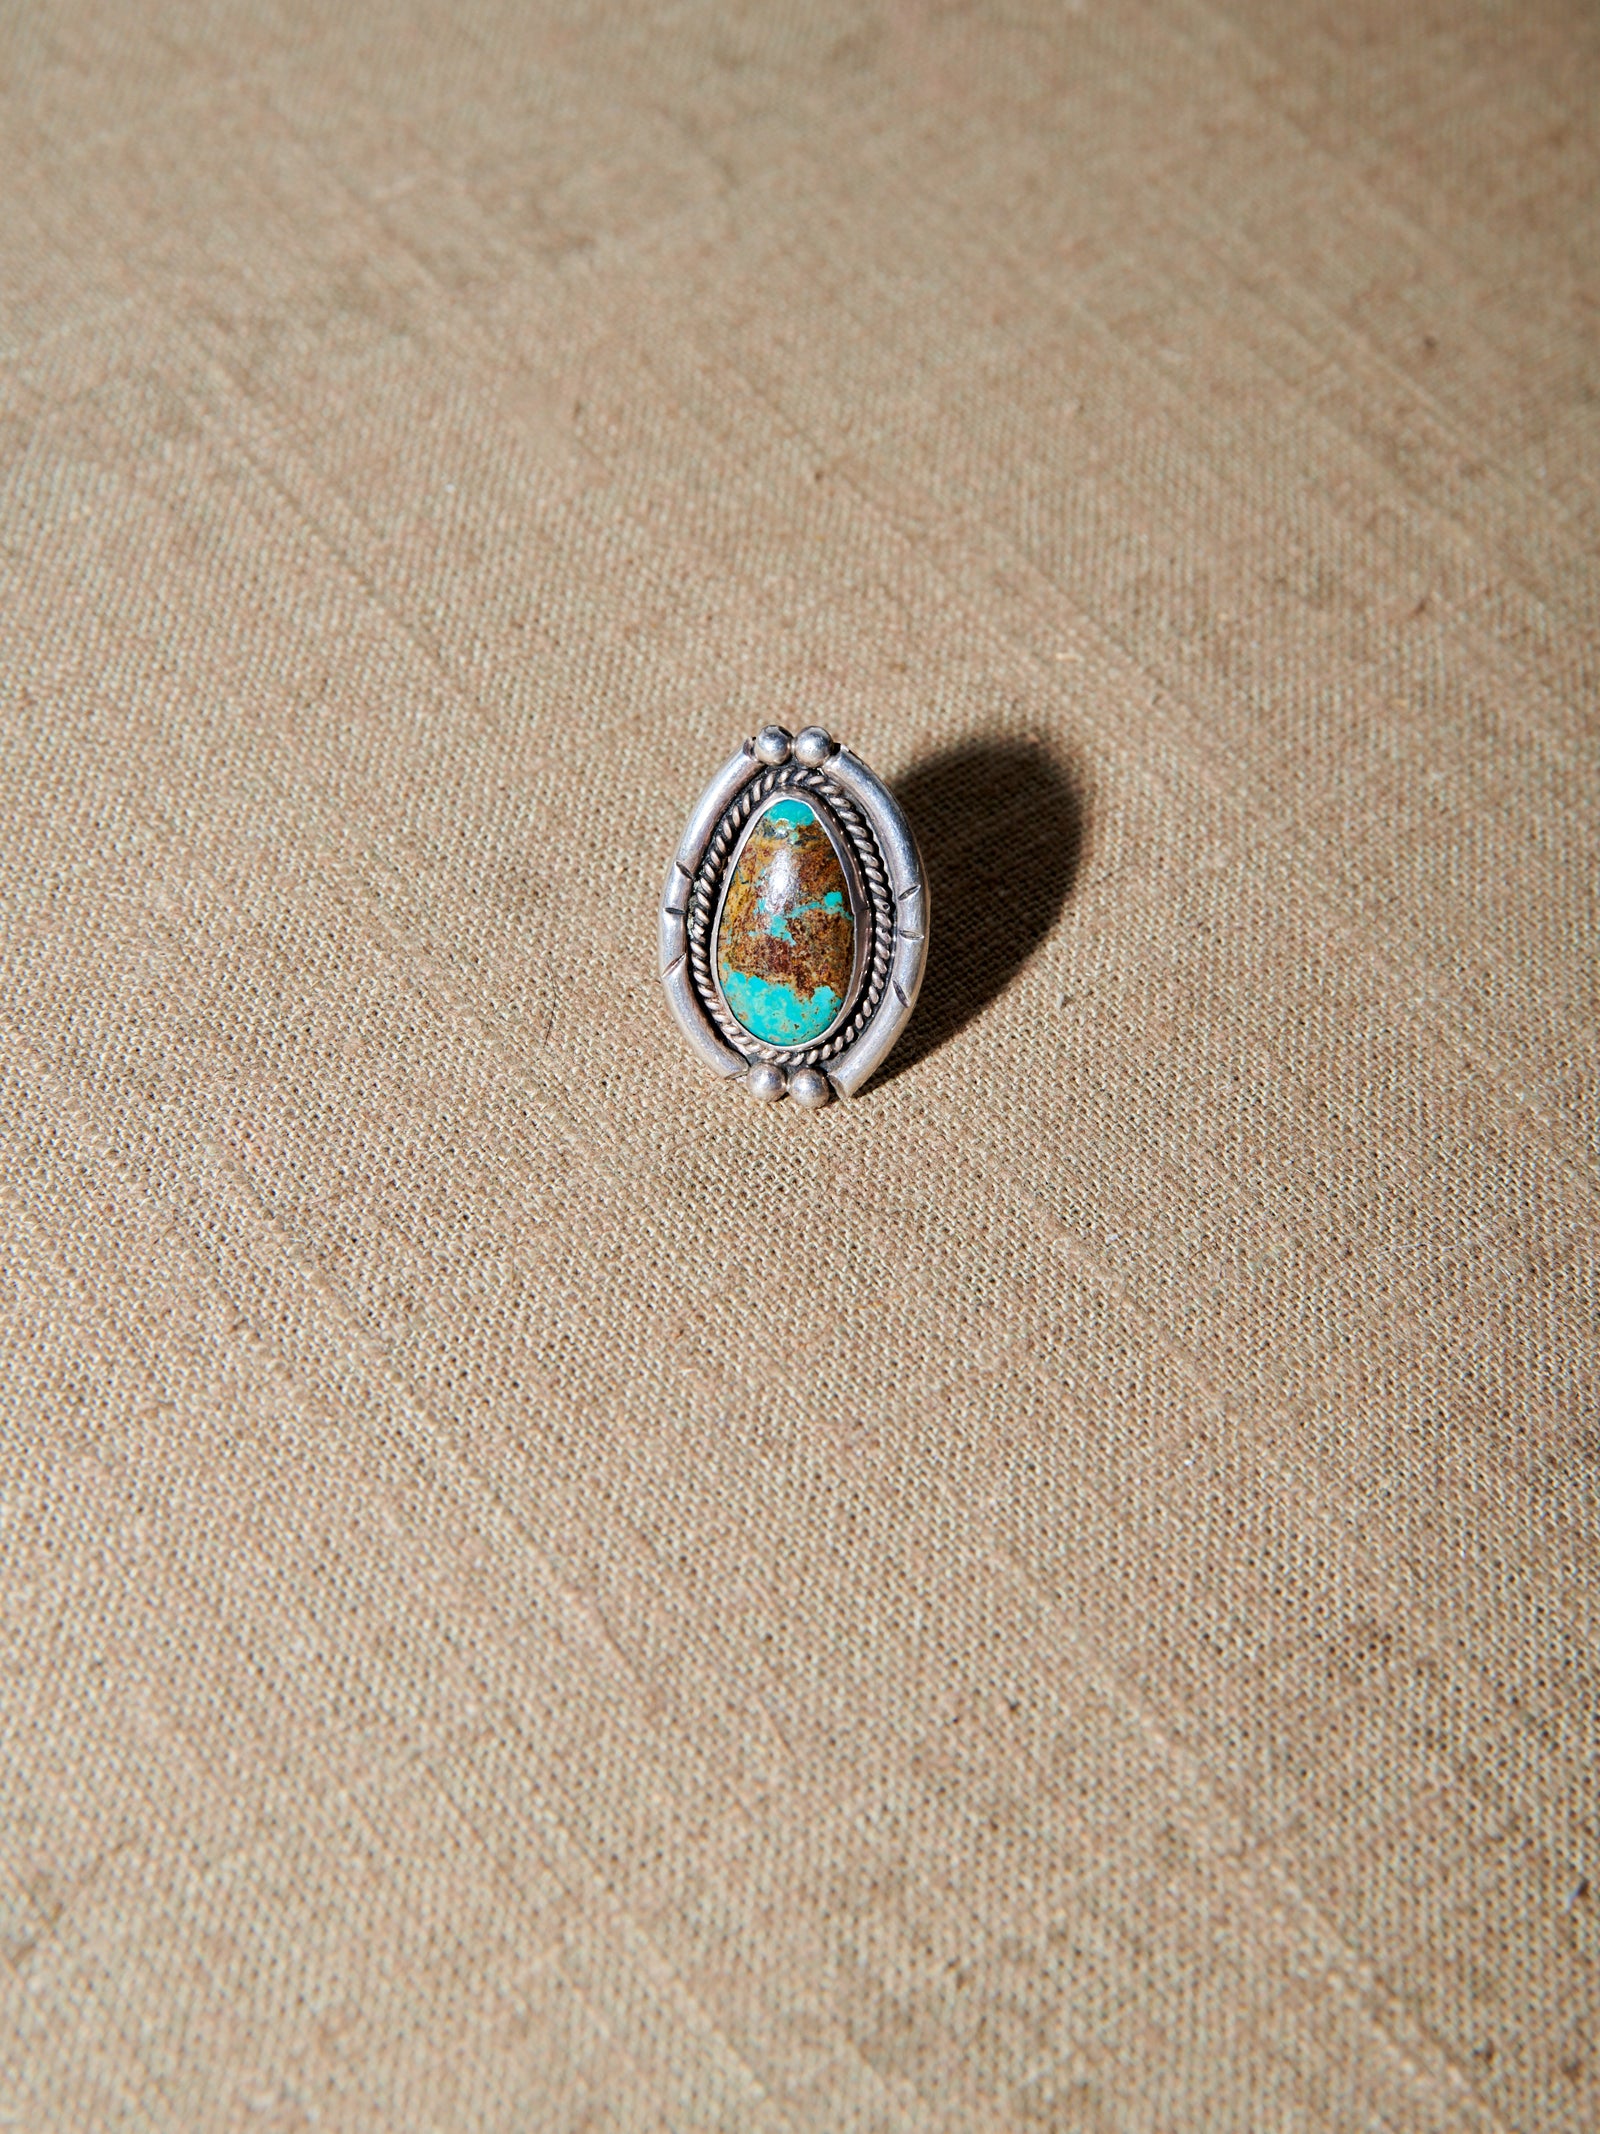 Turquoise Ring Front Close-Up Unworn View